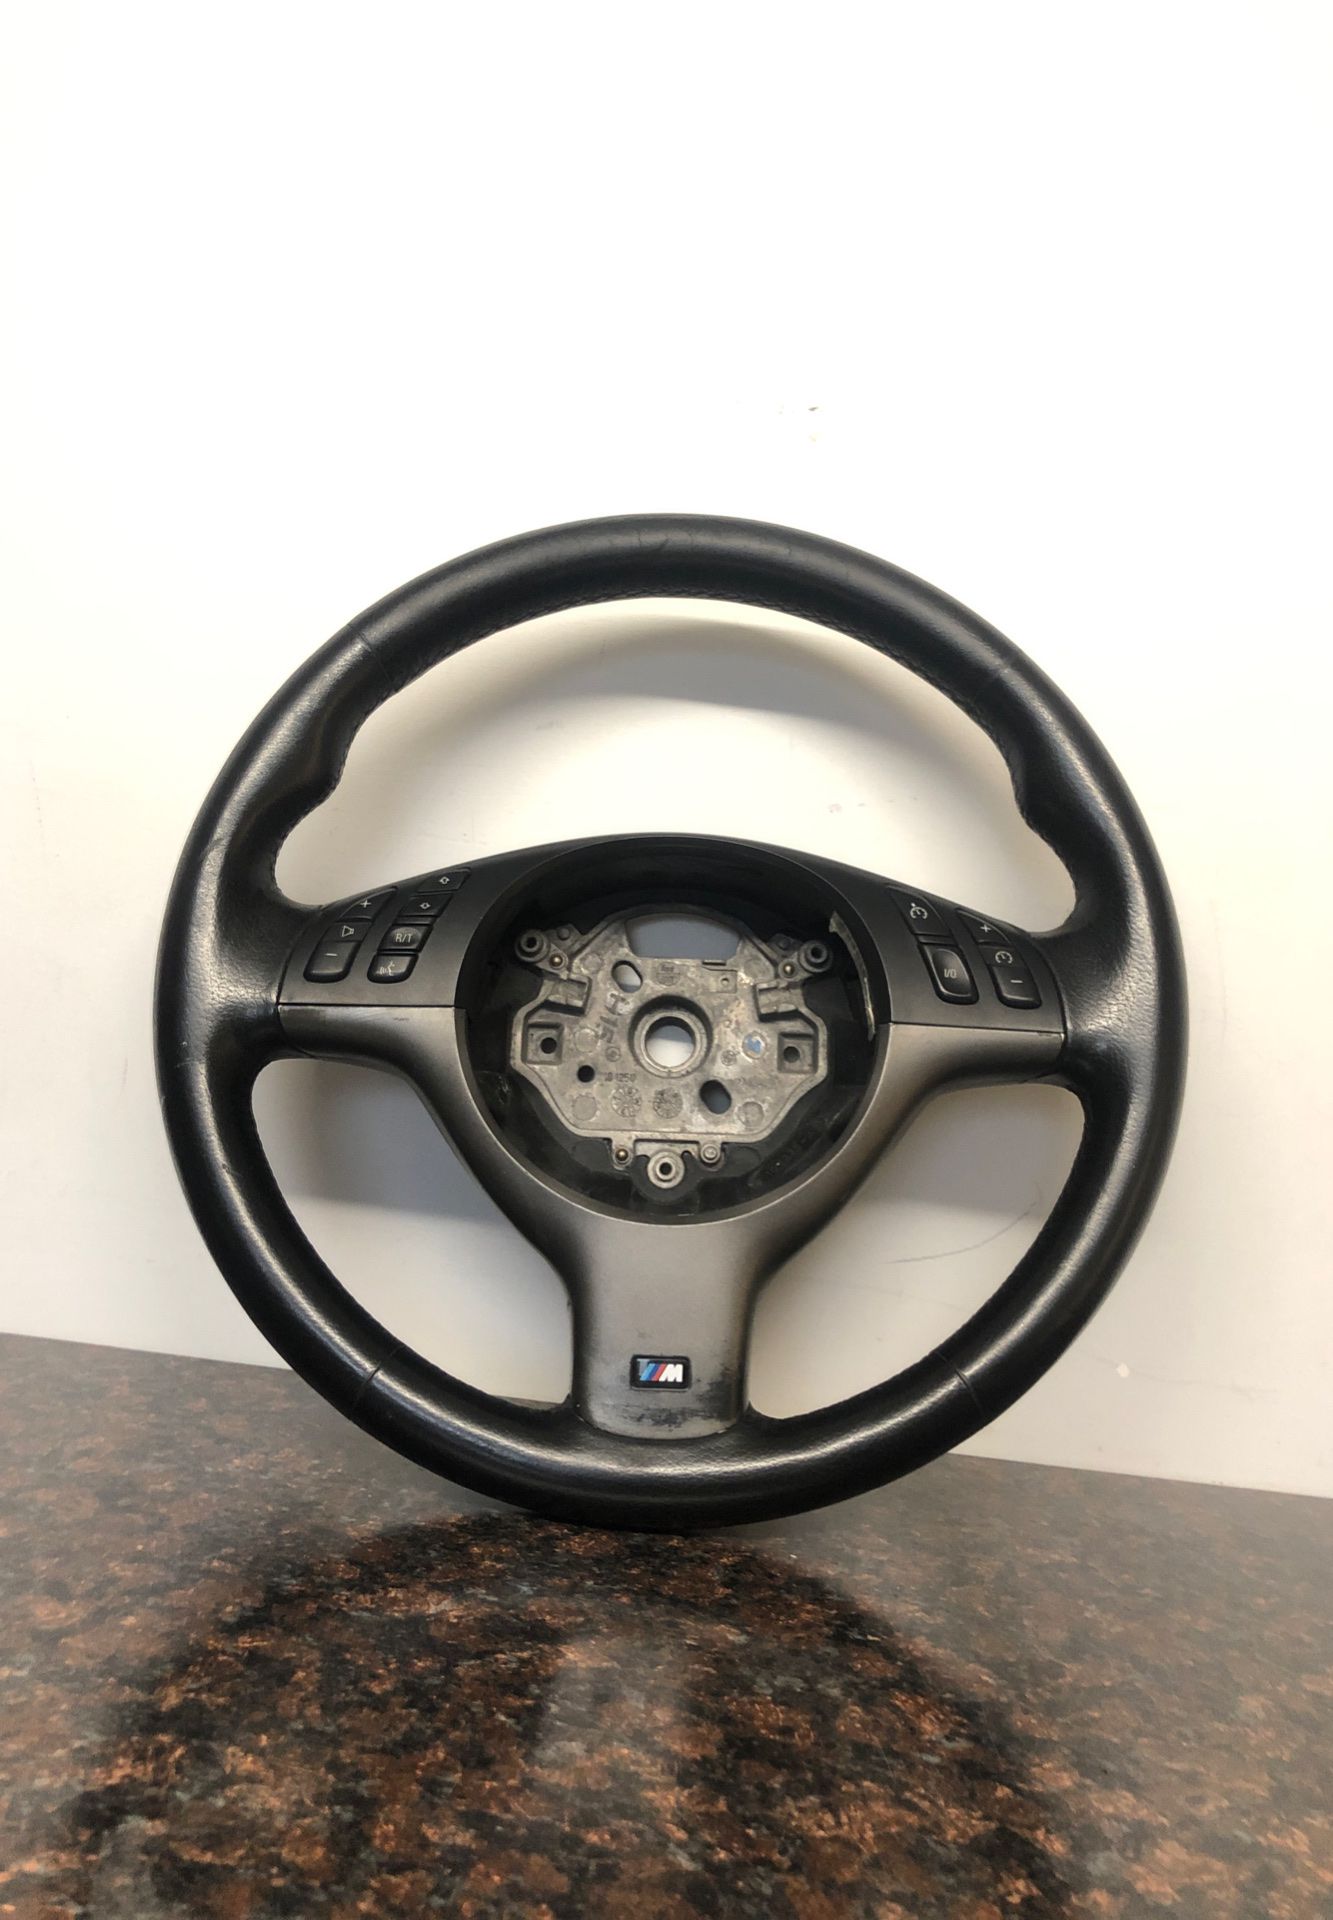 BMW E46 M3 Leather steering wheel with trim and buttons